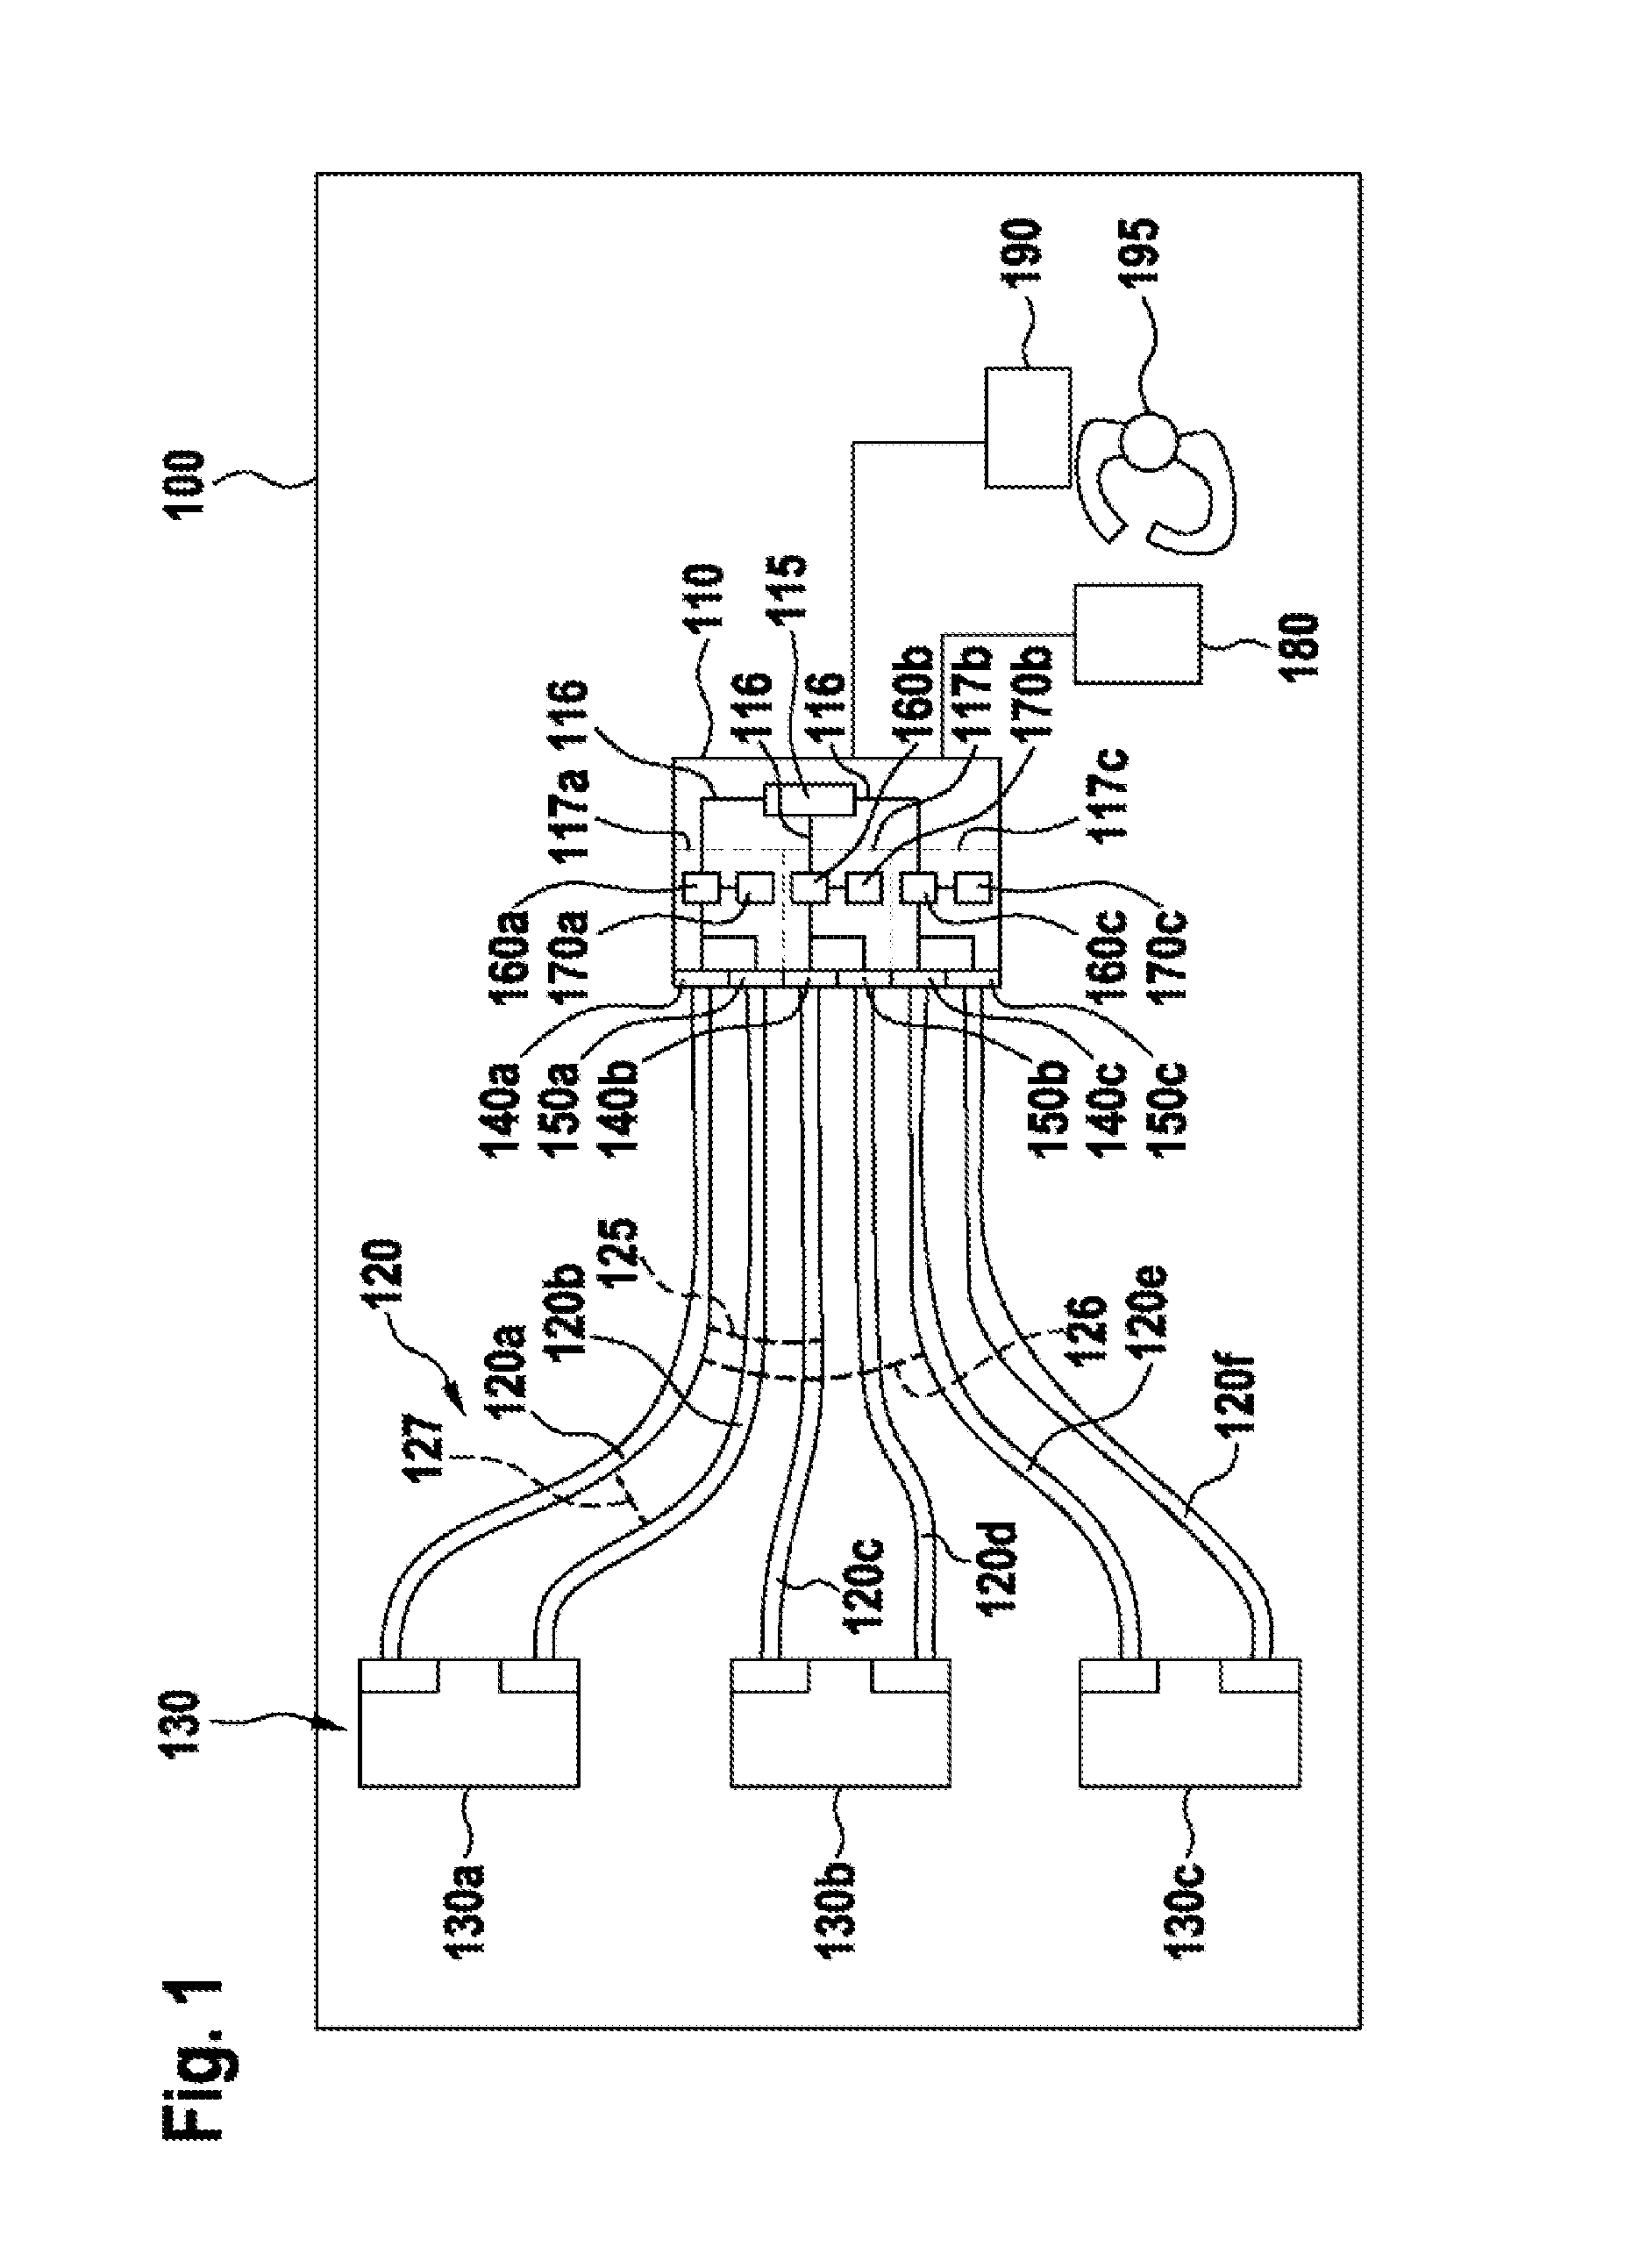 Method and device for establishing a fault in connecting lines between a central unit and a plurality of electronic components which are independent of one another